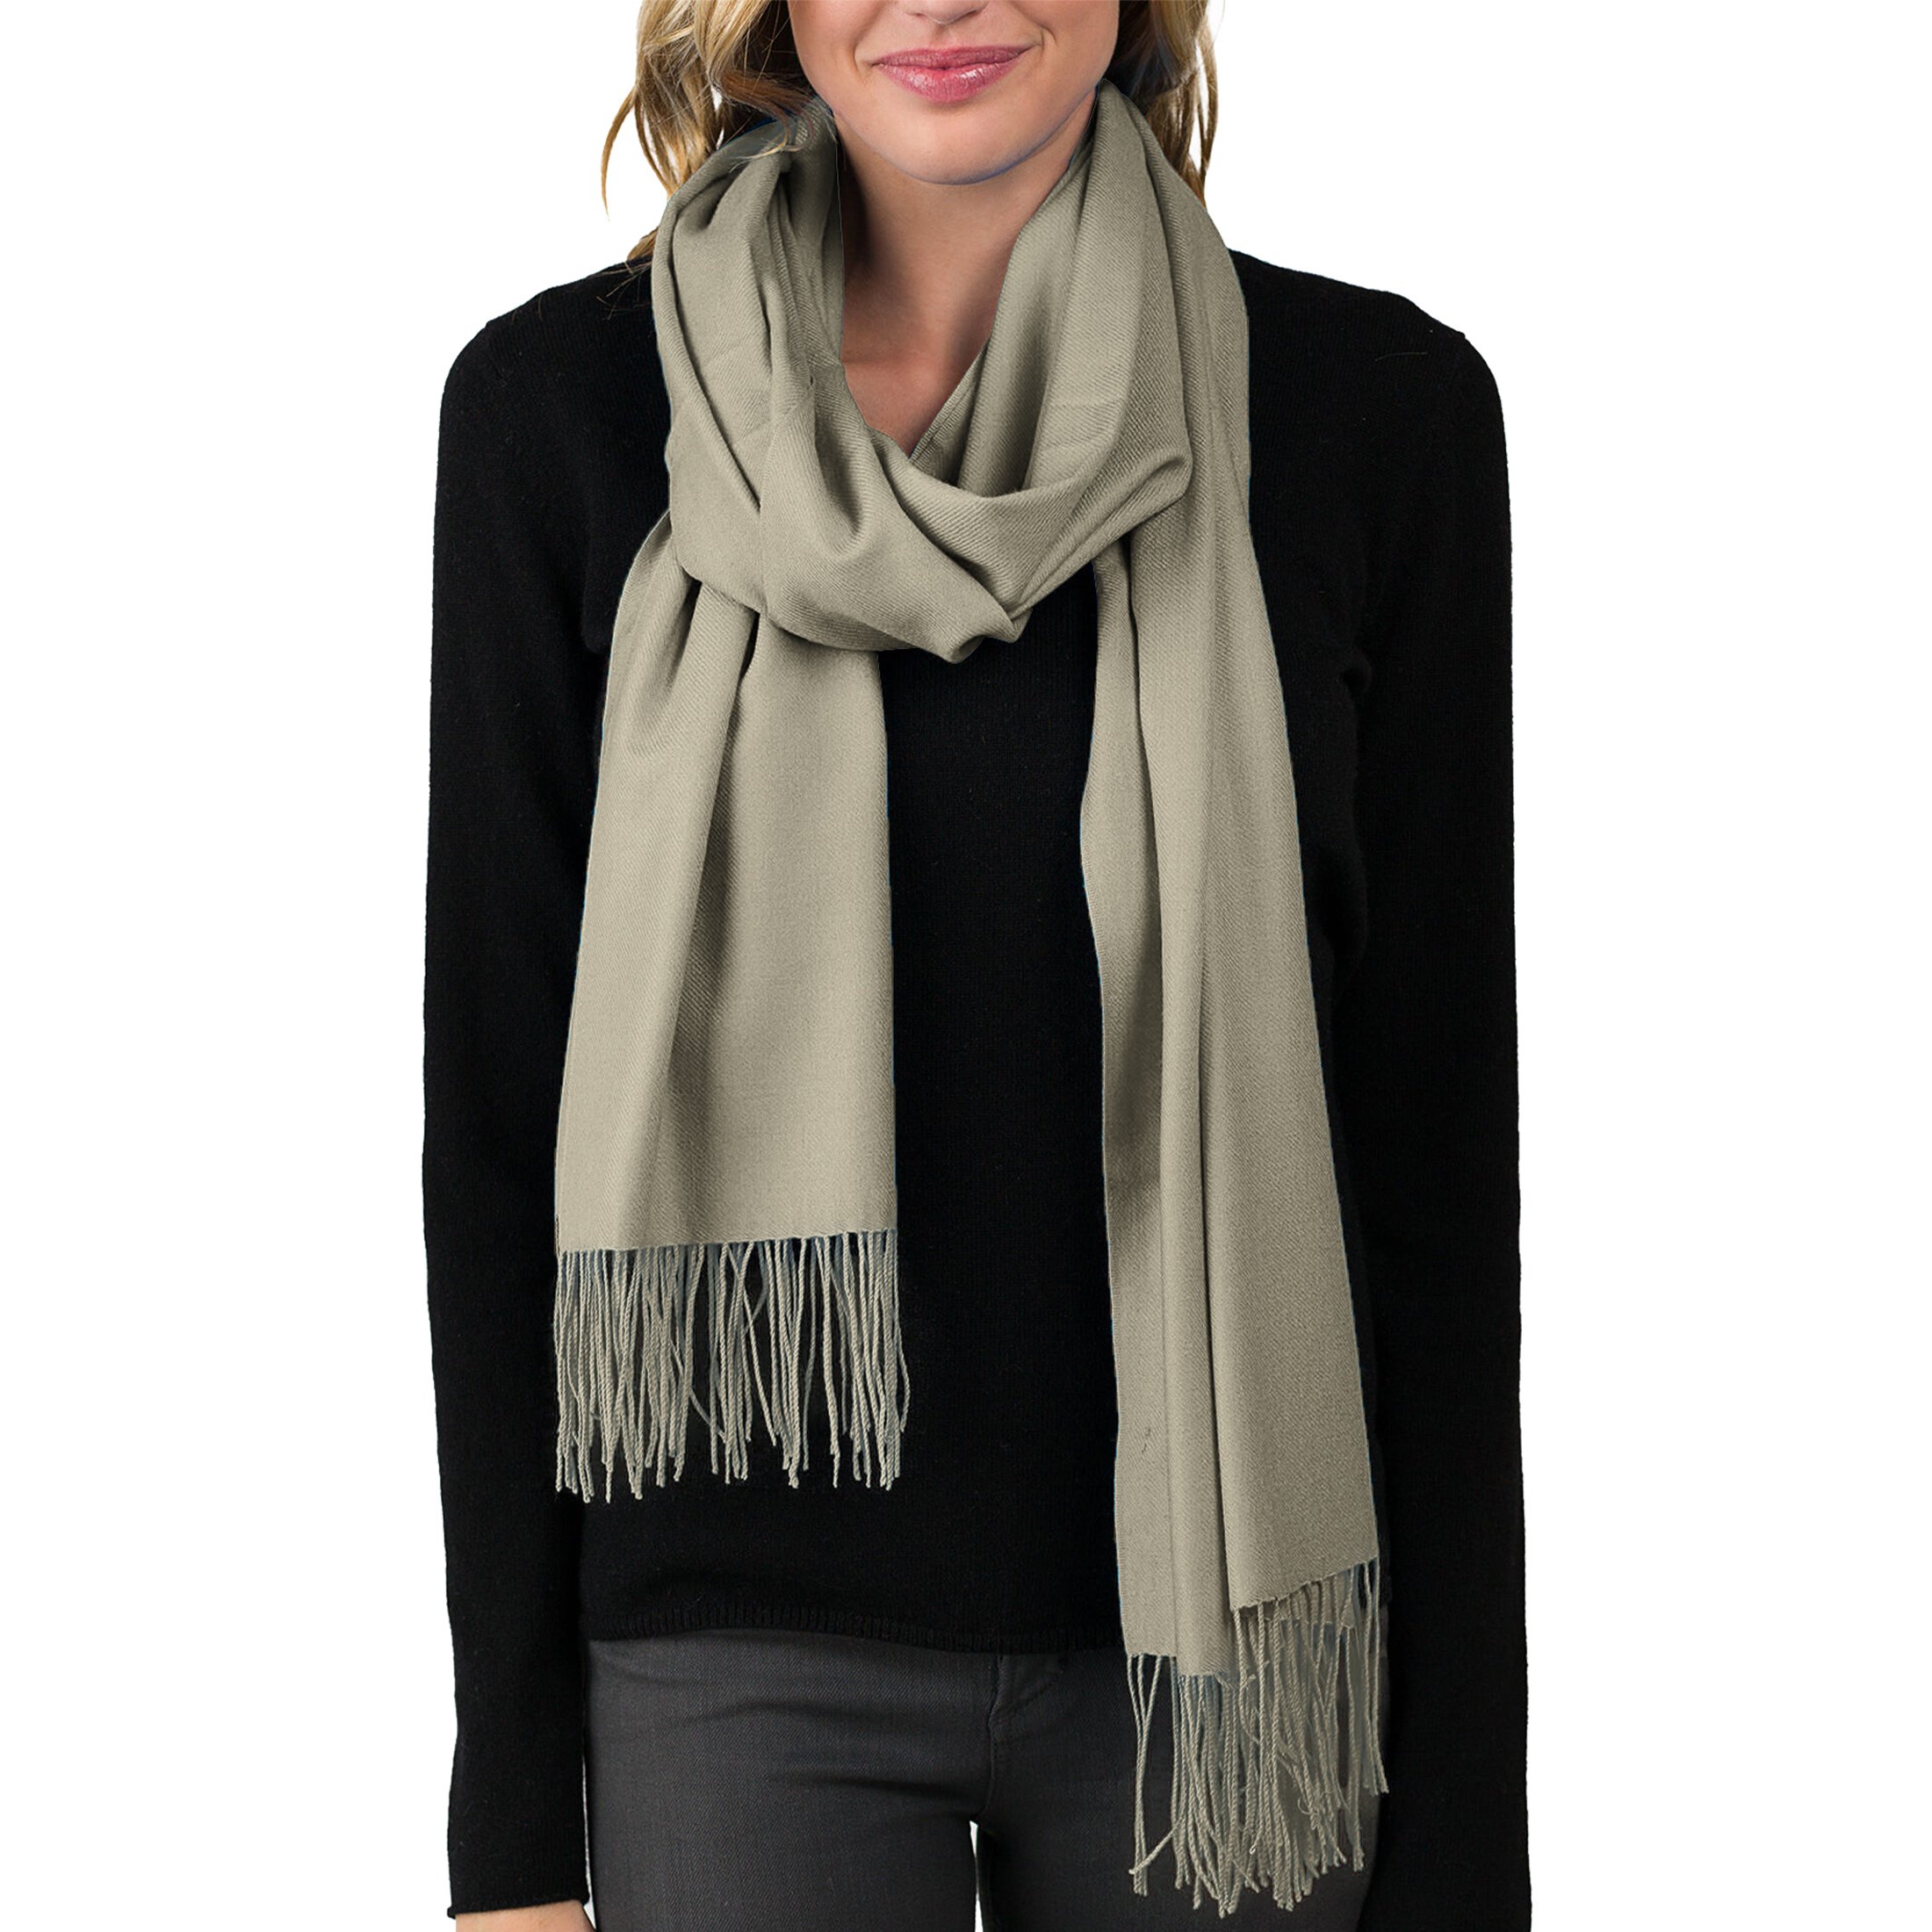 2-Pack: Women’s Ultra-Soft Cashmere Feel Winter Warm Scarfs - Solid & Plaid